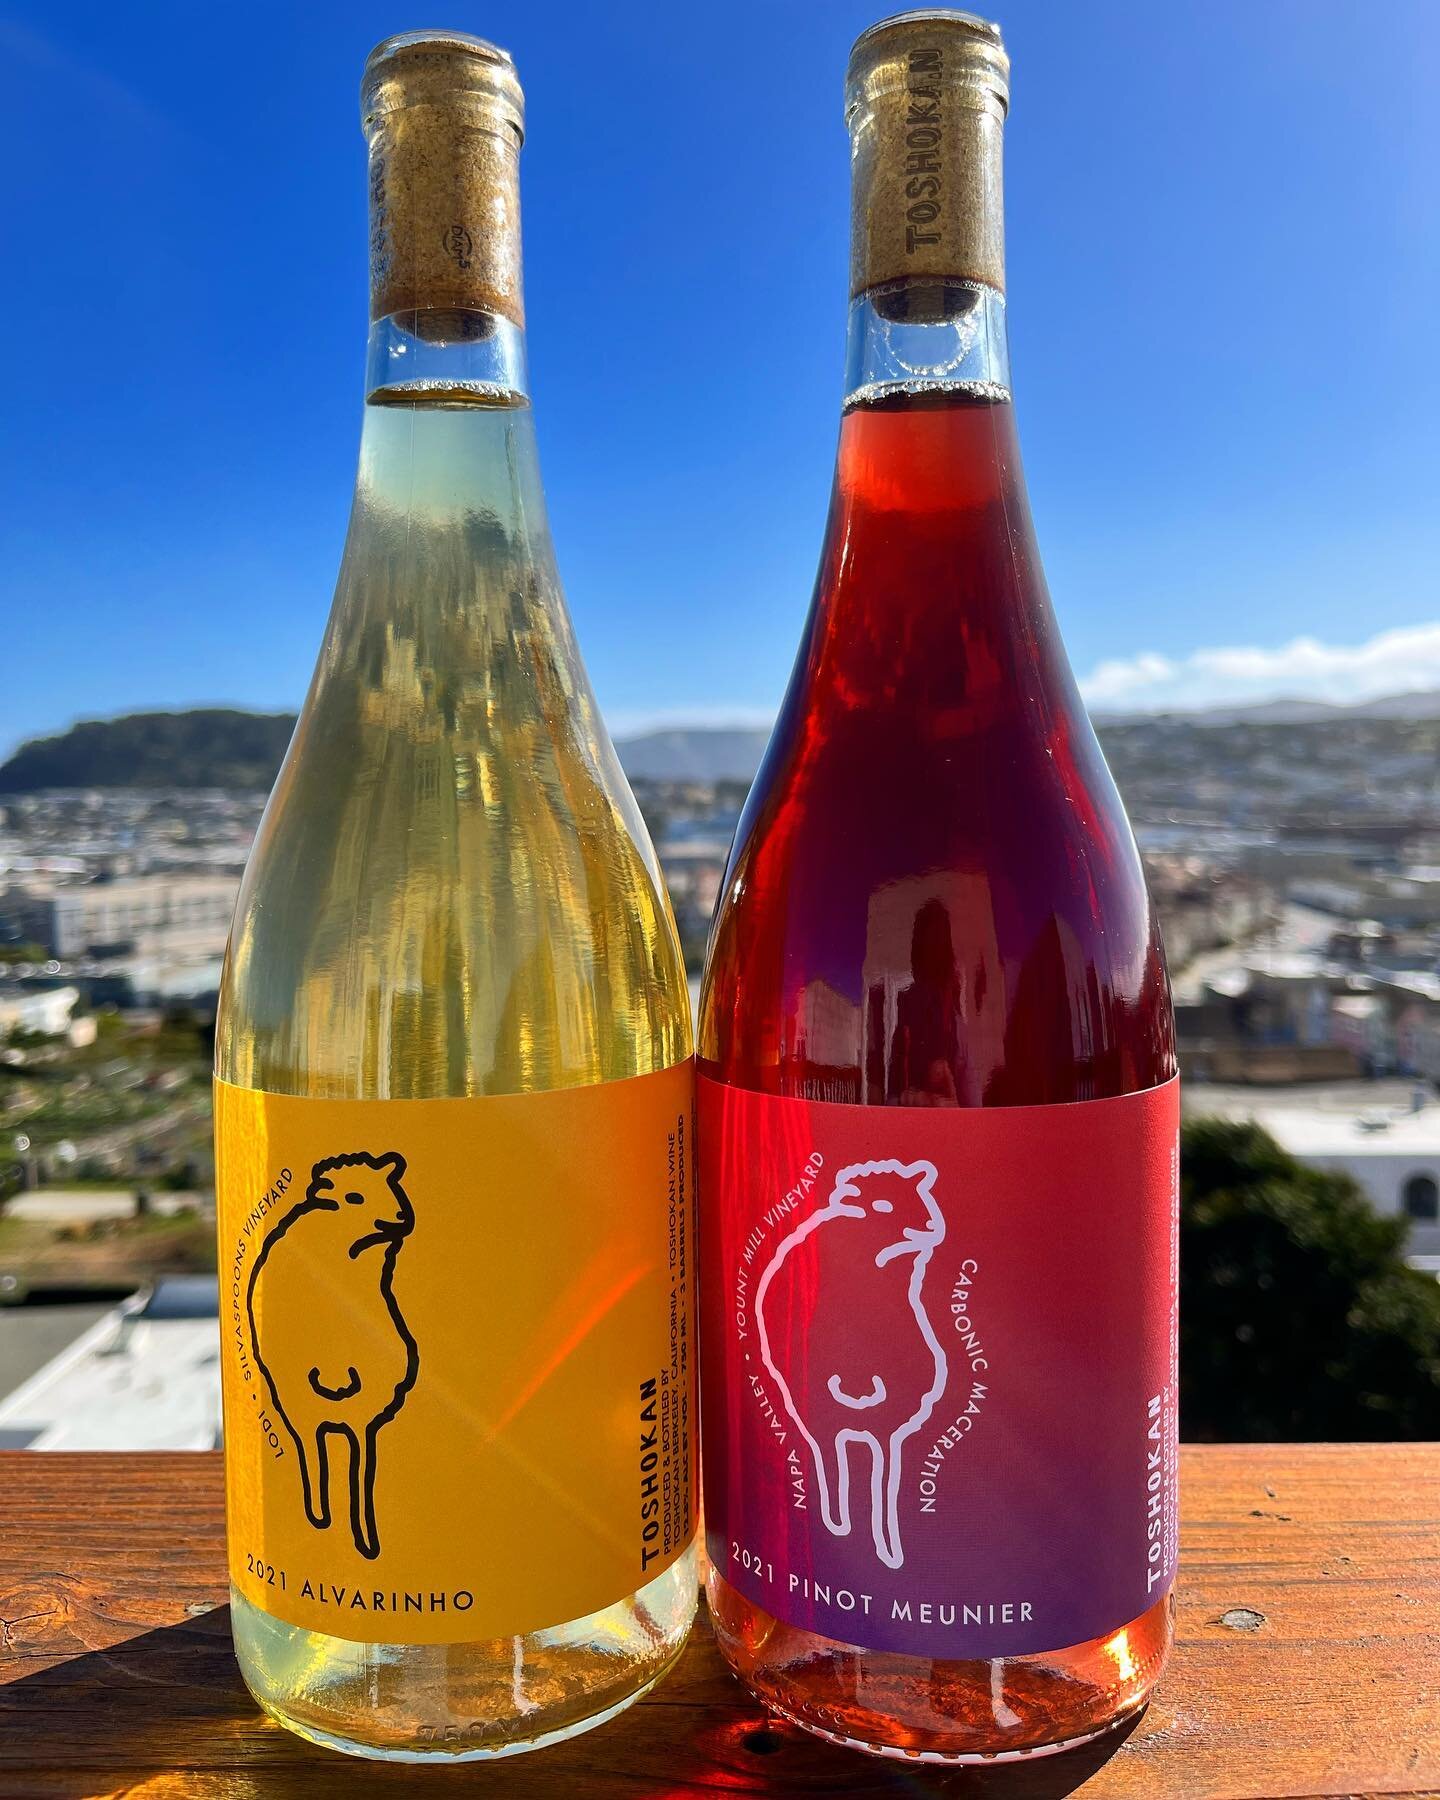 🚨 NEW ARRIVALS 🚨 from @toshokanwine - 2021 Alvarinho from Lodi and 2021 Pinot Meunier from Napa. Perfect pairing for springtime. Available now! #toshokan #californiawine #naturalwine #berkeley #alvarinho #pinotmeunier #glouglou